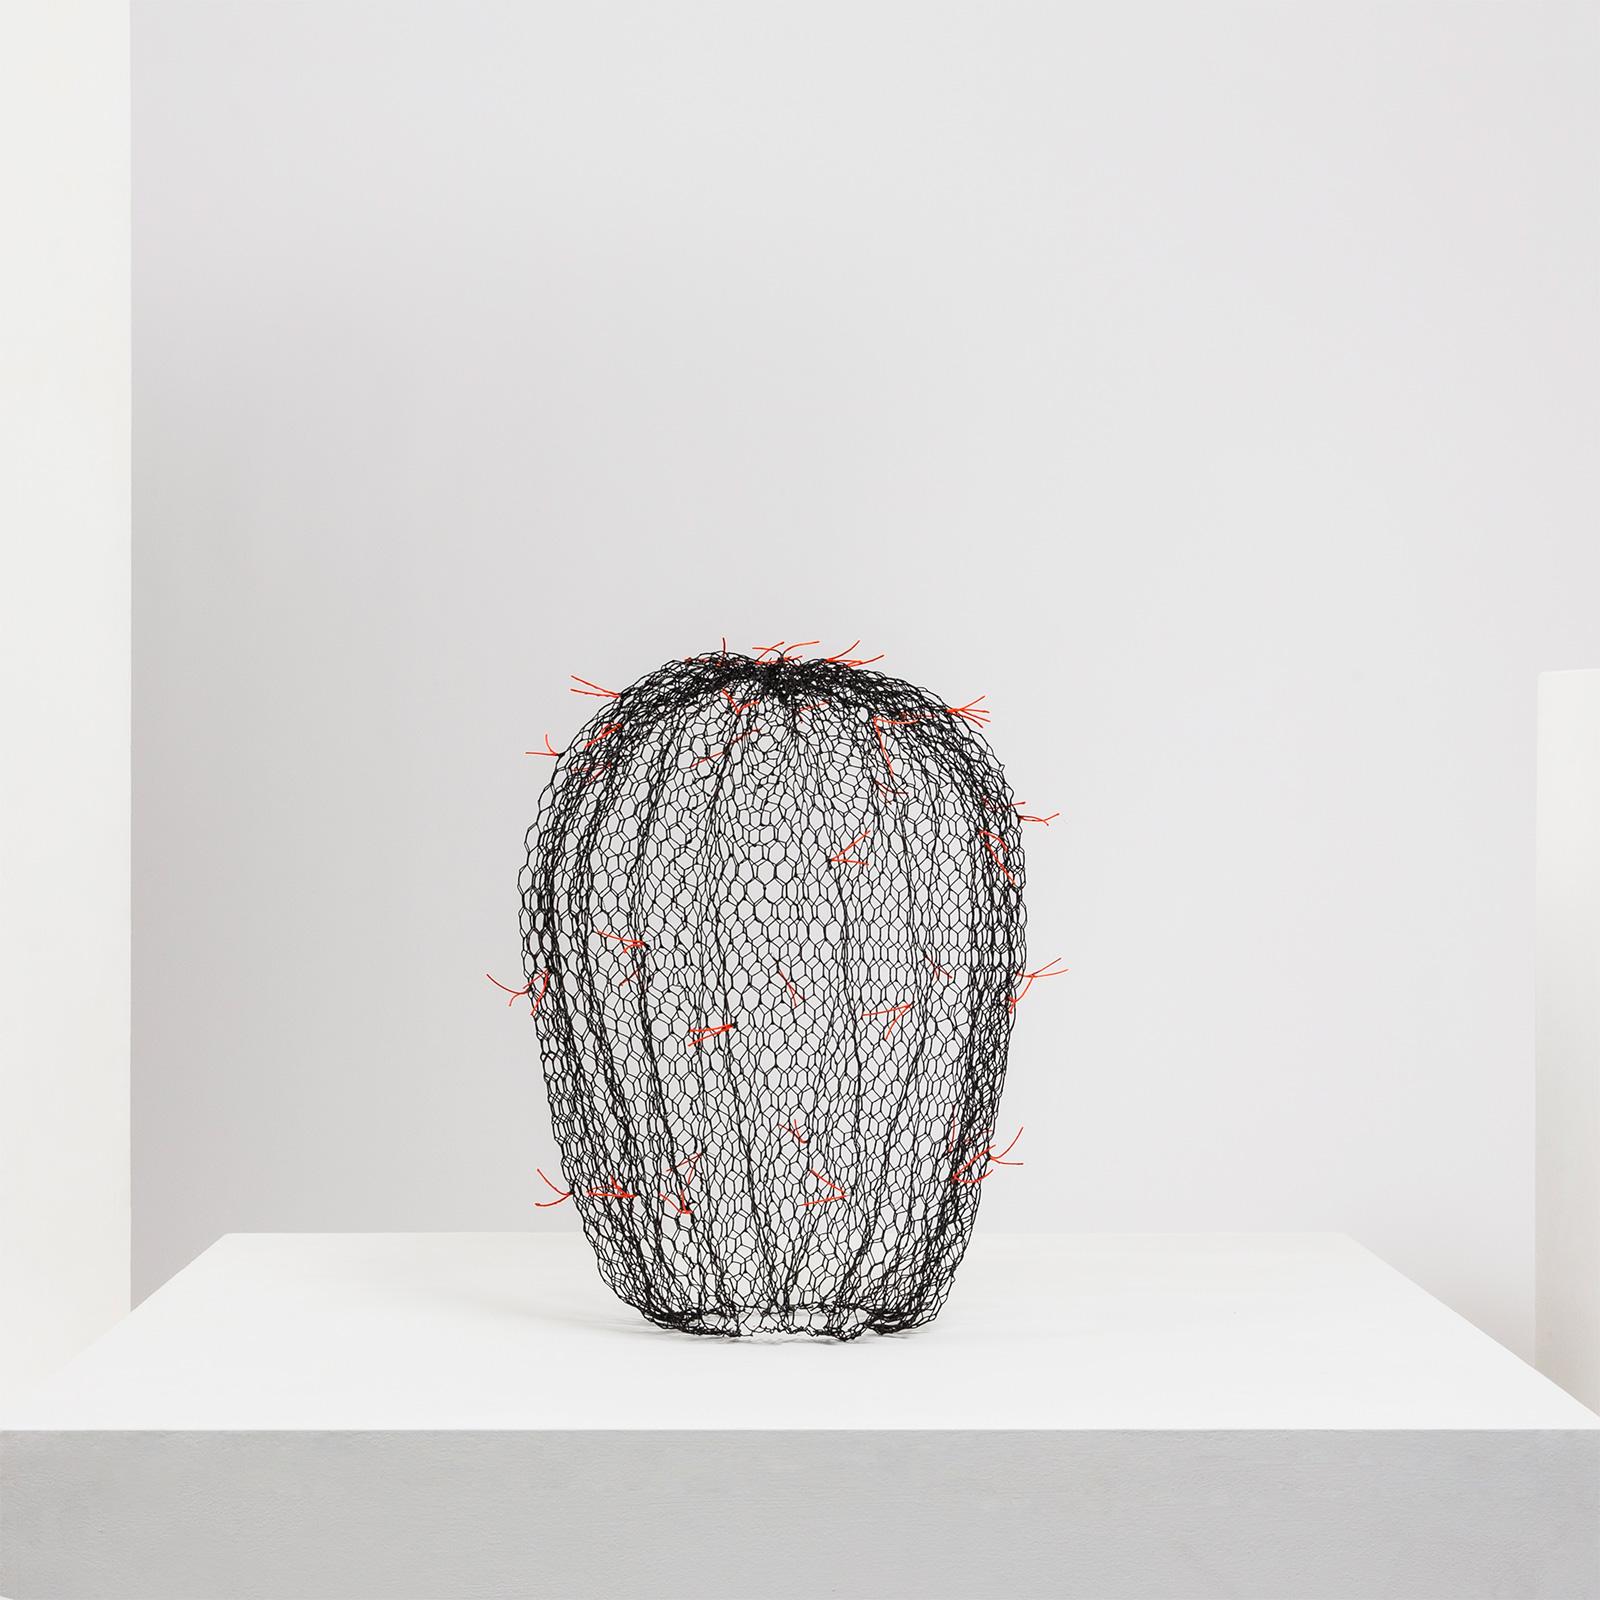 Benedetta works in many materials but is most well known for her innovative and extraordinarily wire work. Each piece starts life as flat rolled chicken wire which is gradually shaped by hand, twisting and joining the pieces together to give a